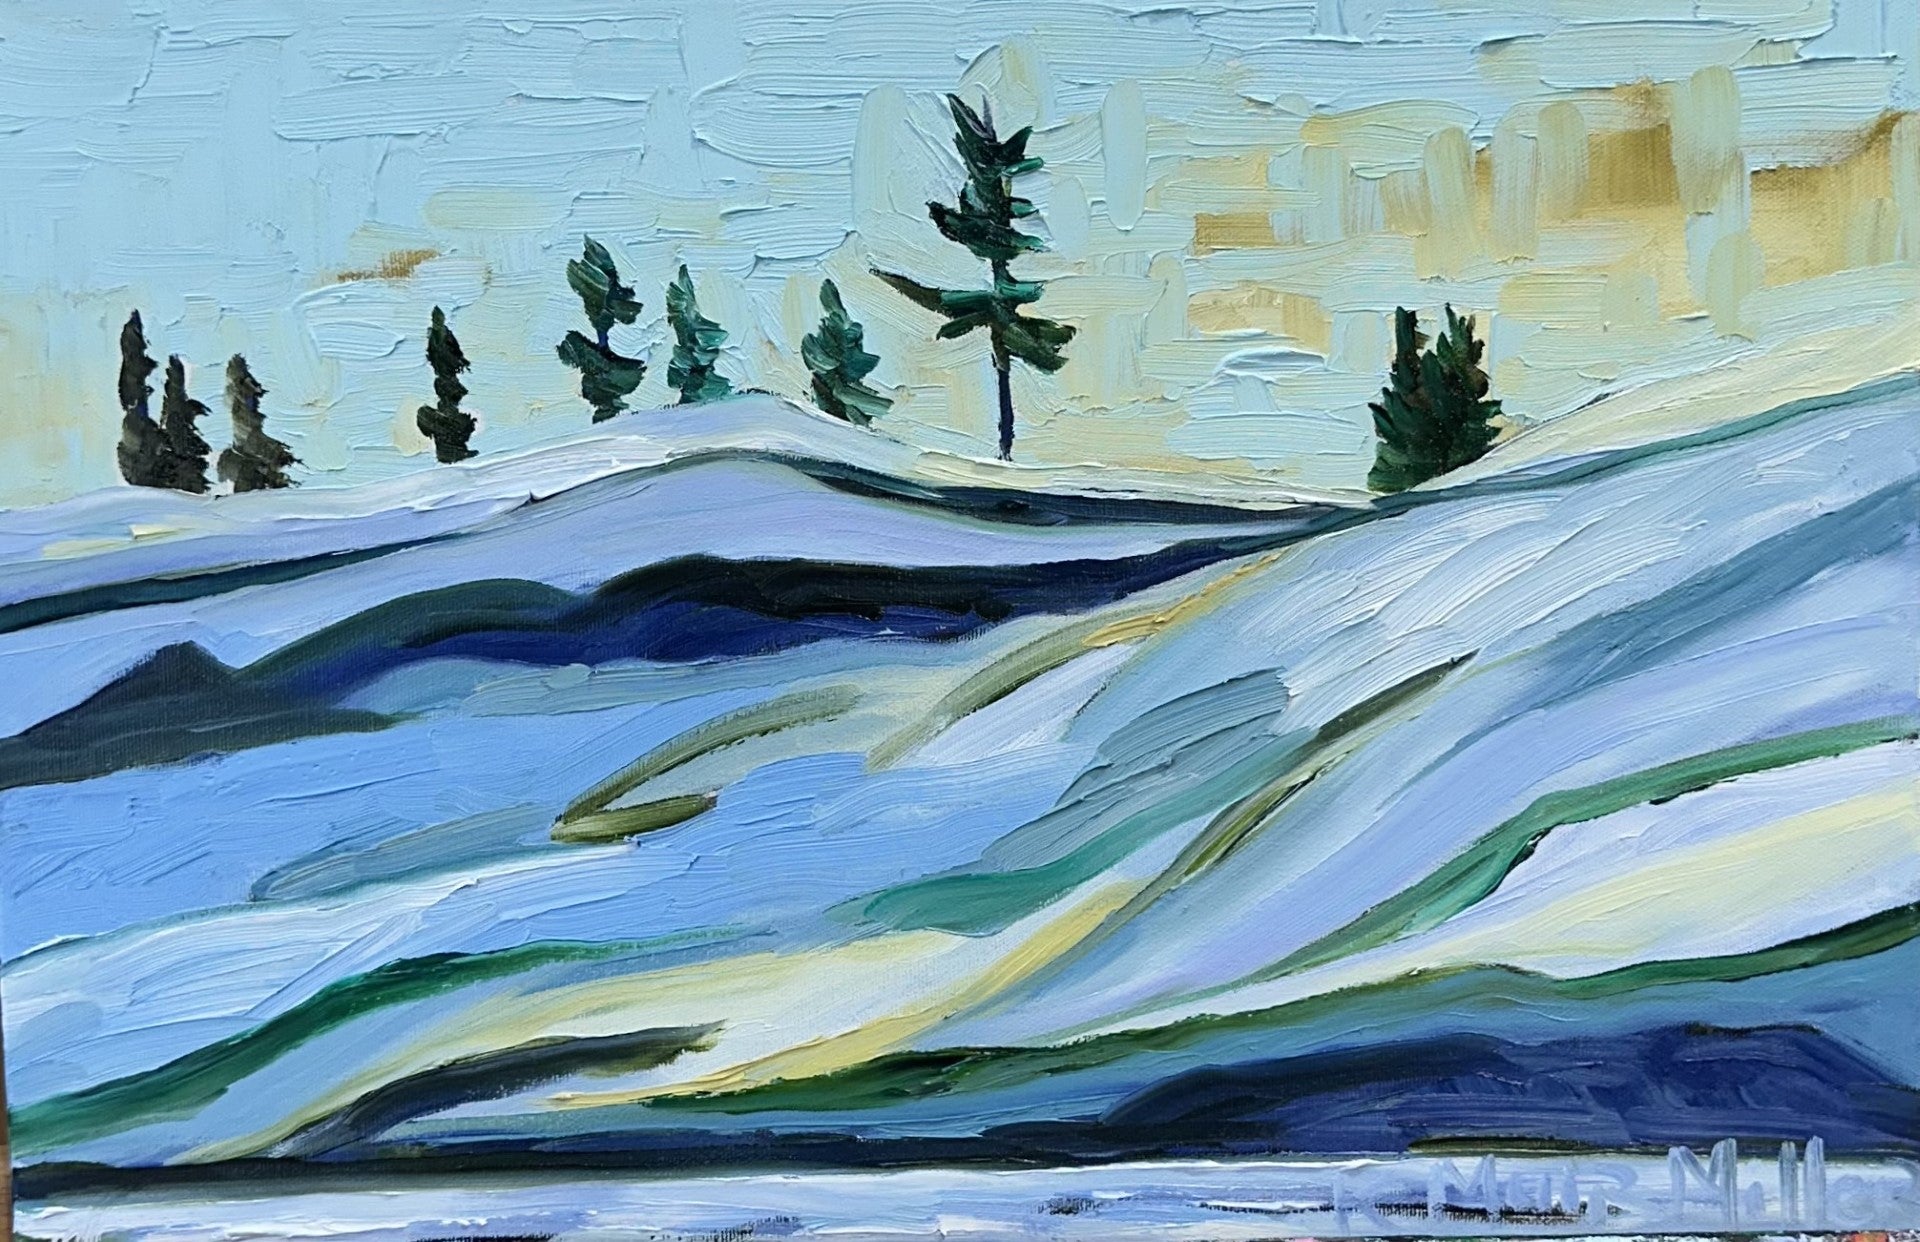 988 "Drifting By" Le Massif, Quebec